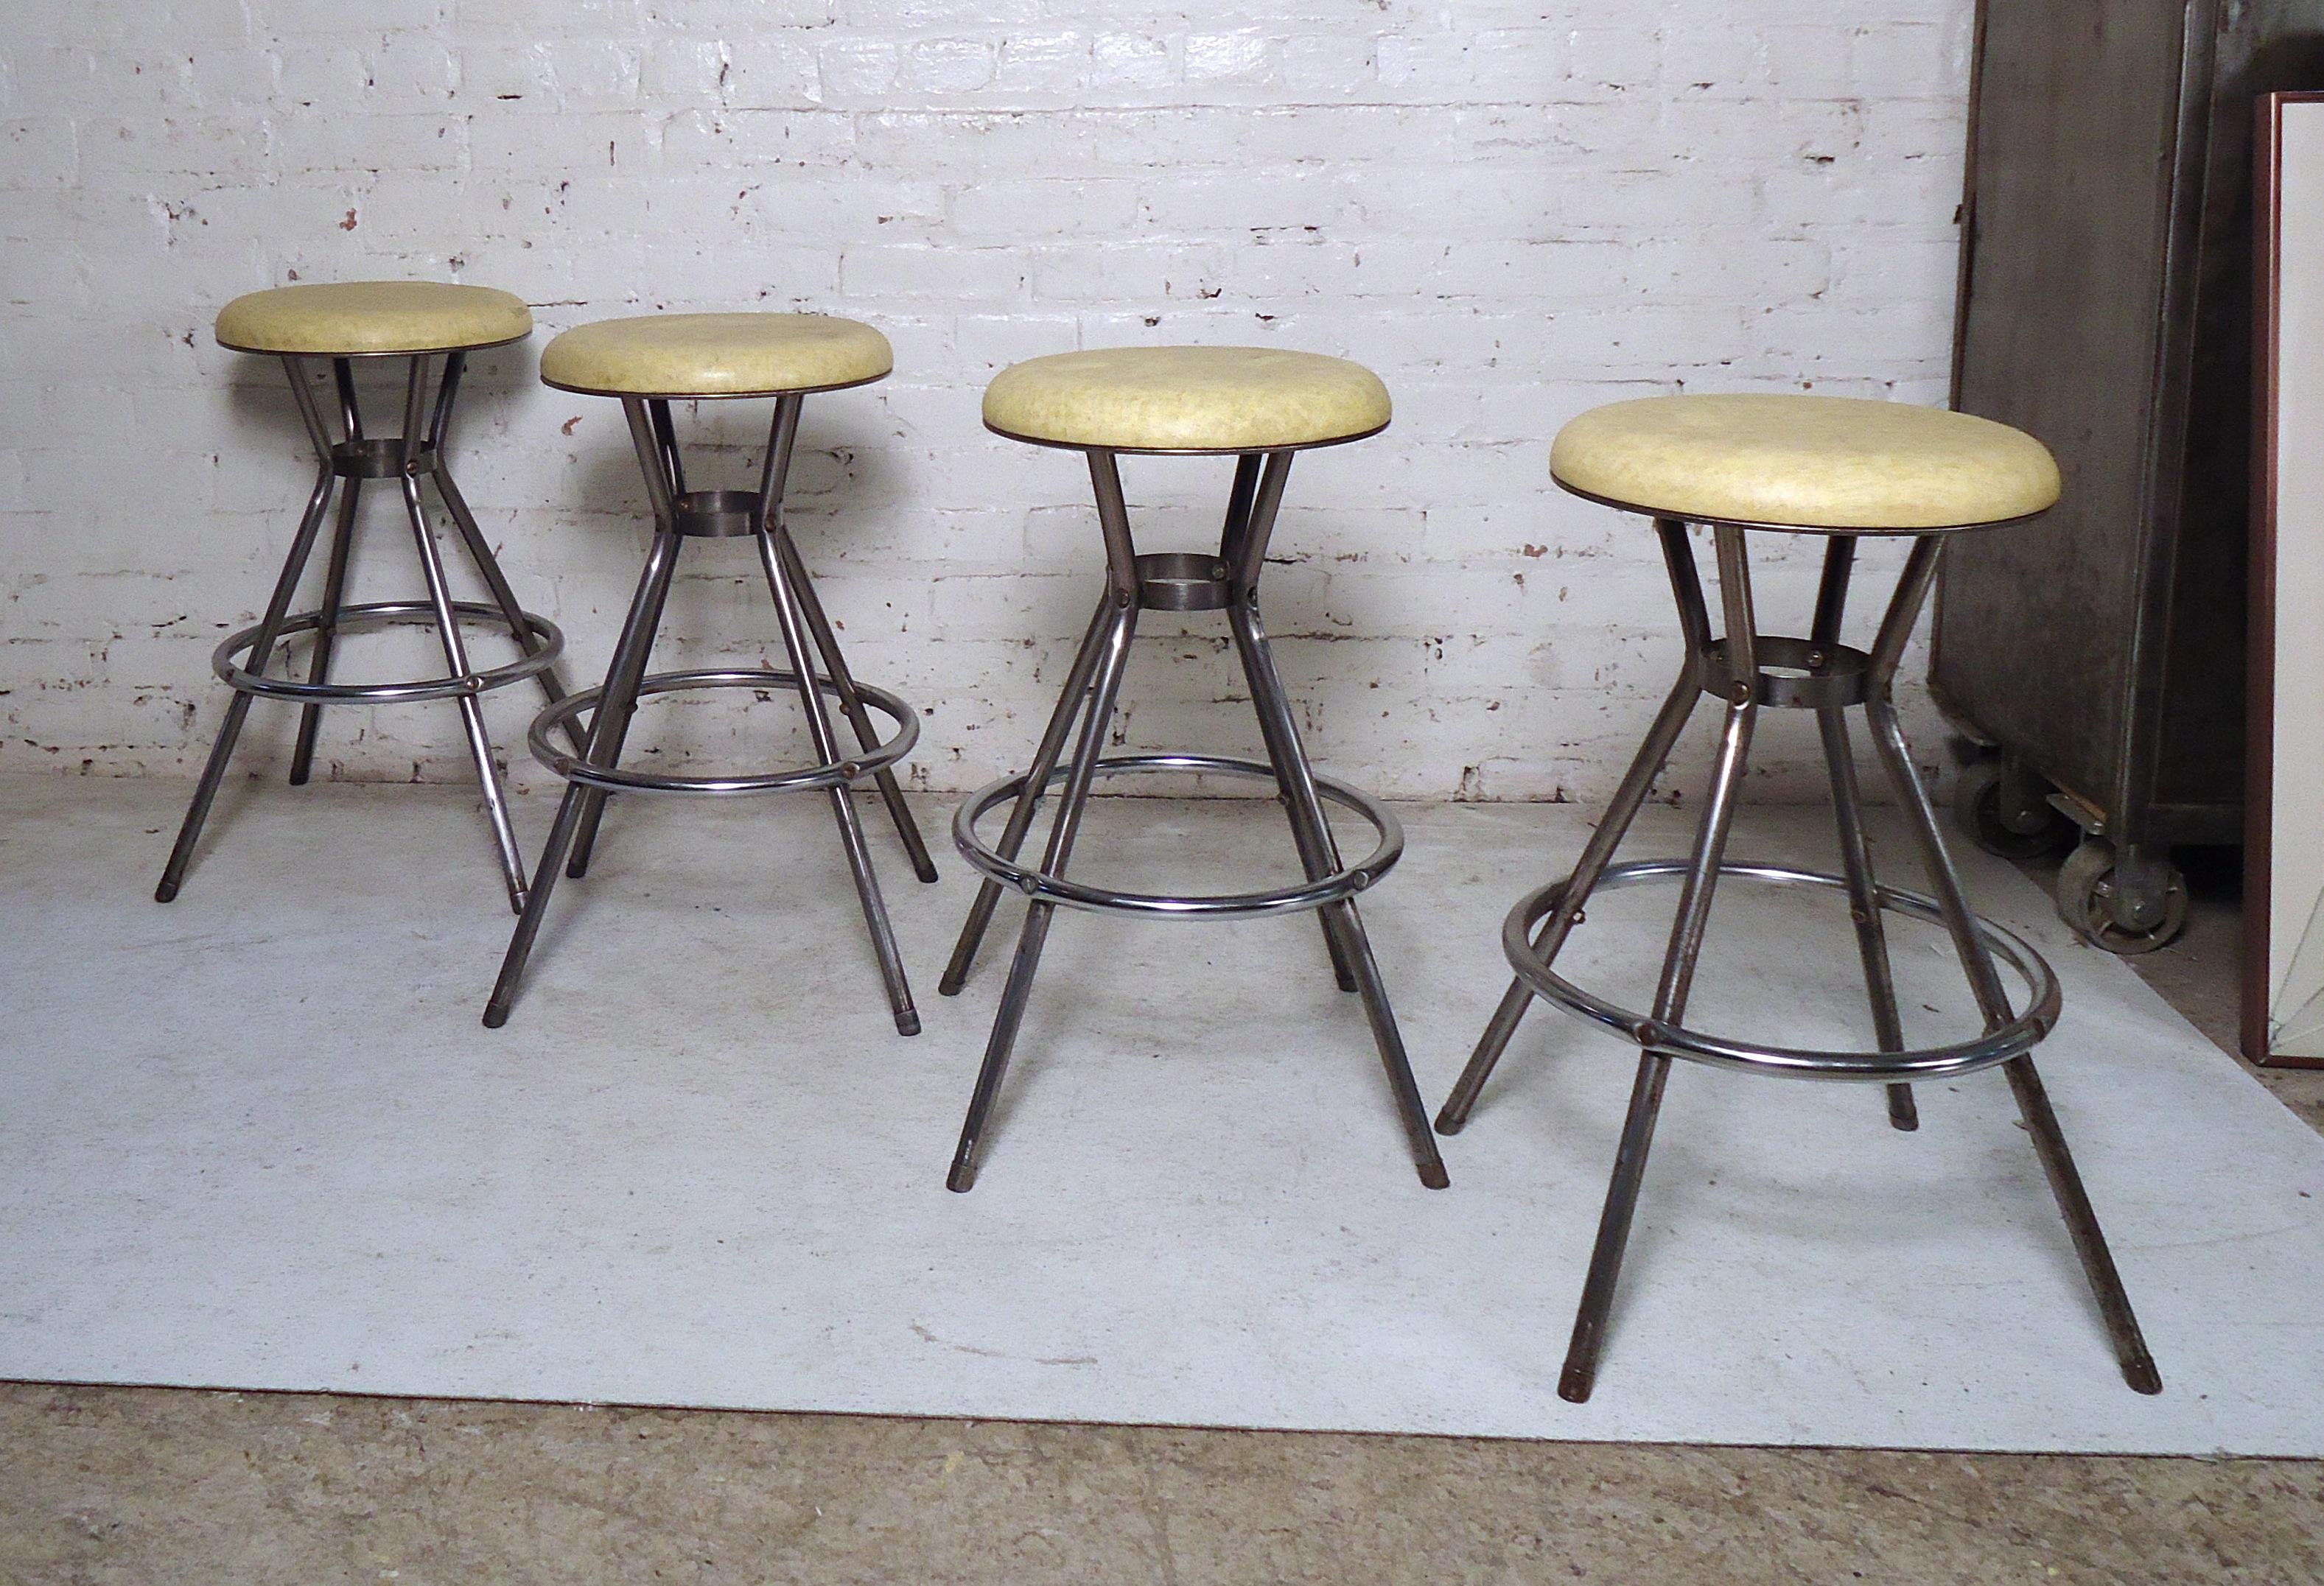 Vintage industrial metal set of four stools by Cosco, these seats would make a great addition to any home.
Please confirm item location (NY or NJ).